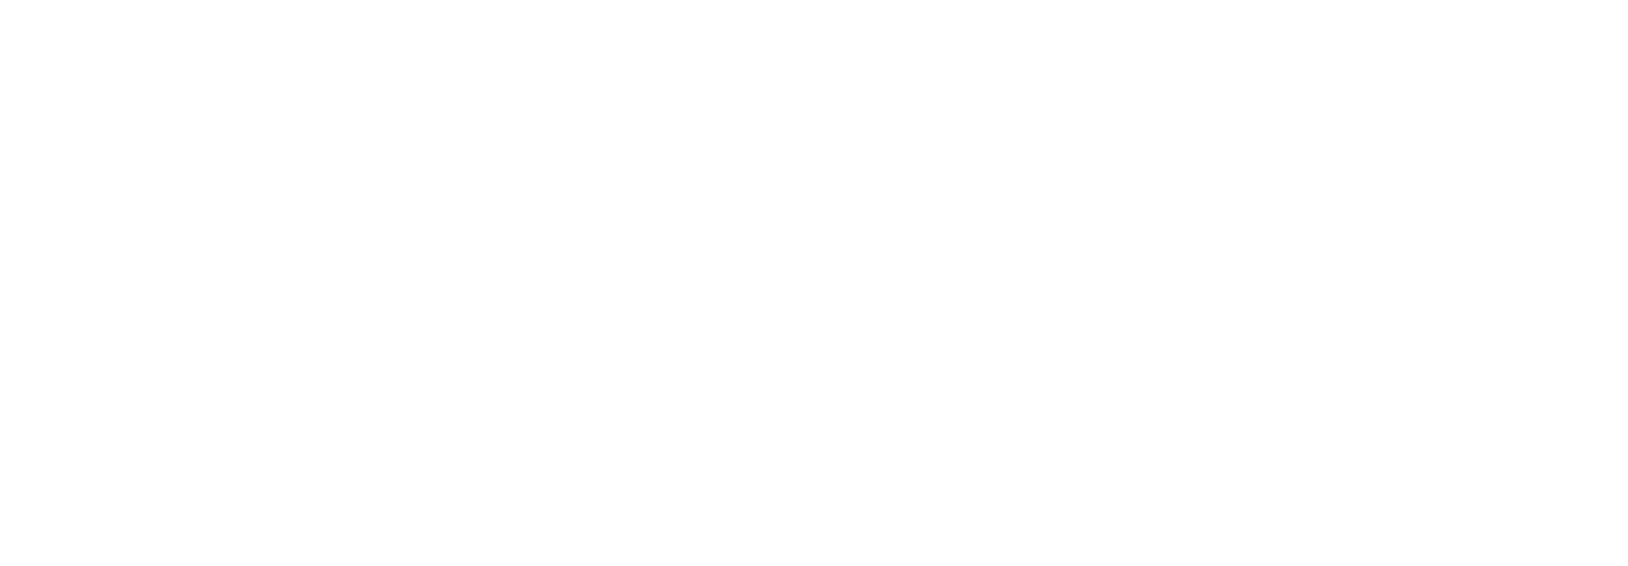 Rigetti Computing logo large for dark backgrounds (transparent PNG)